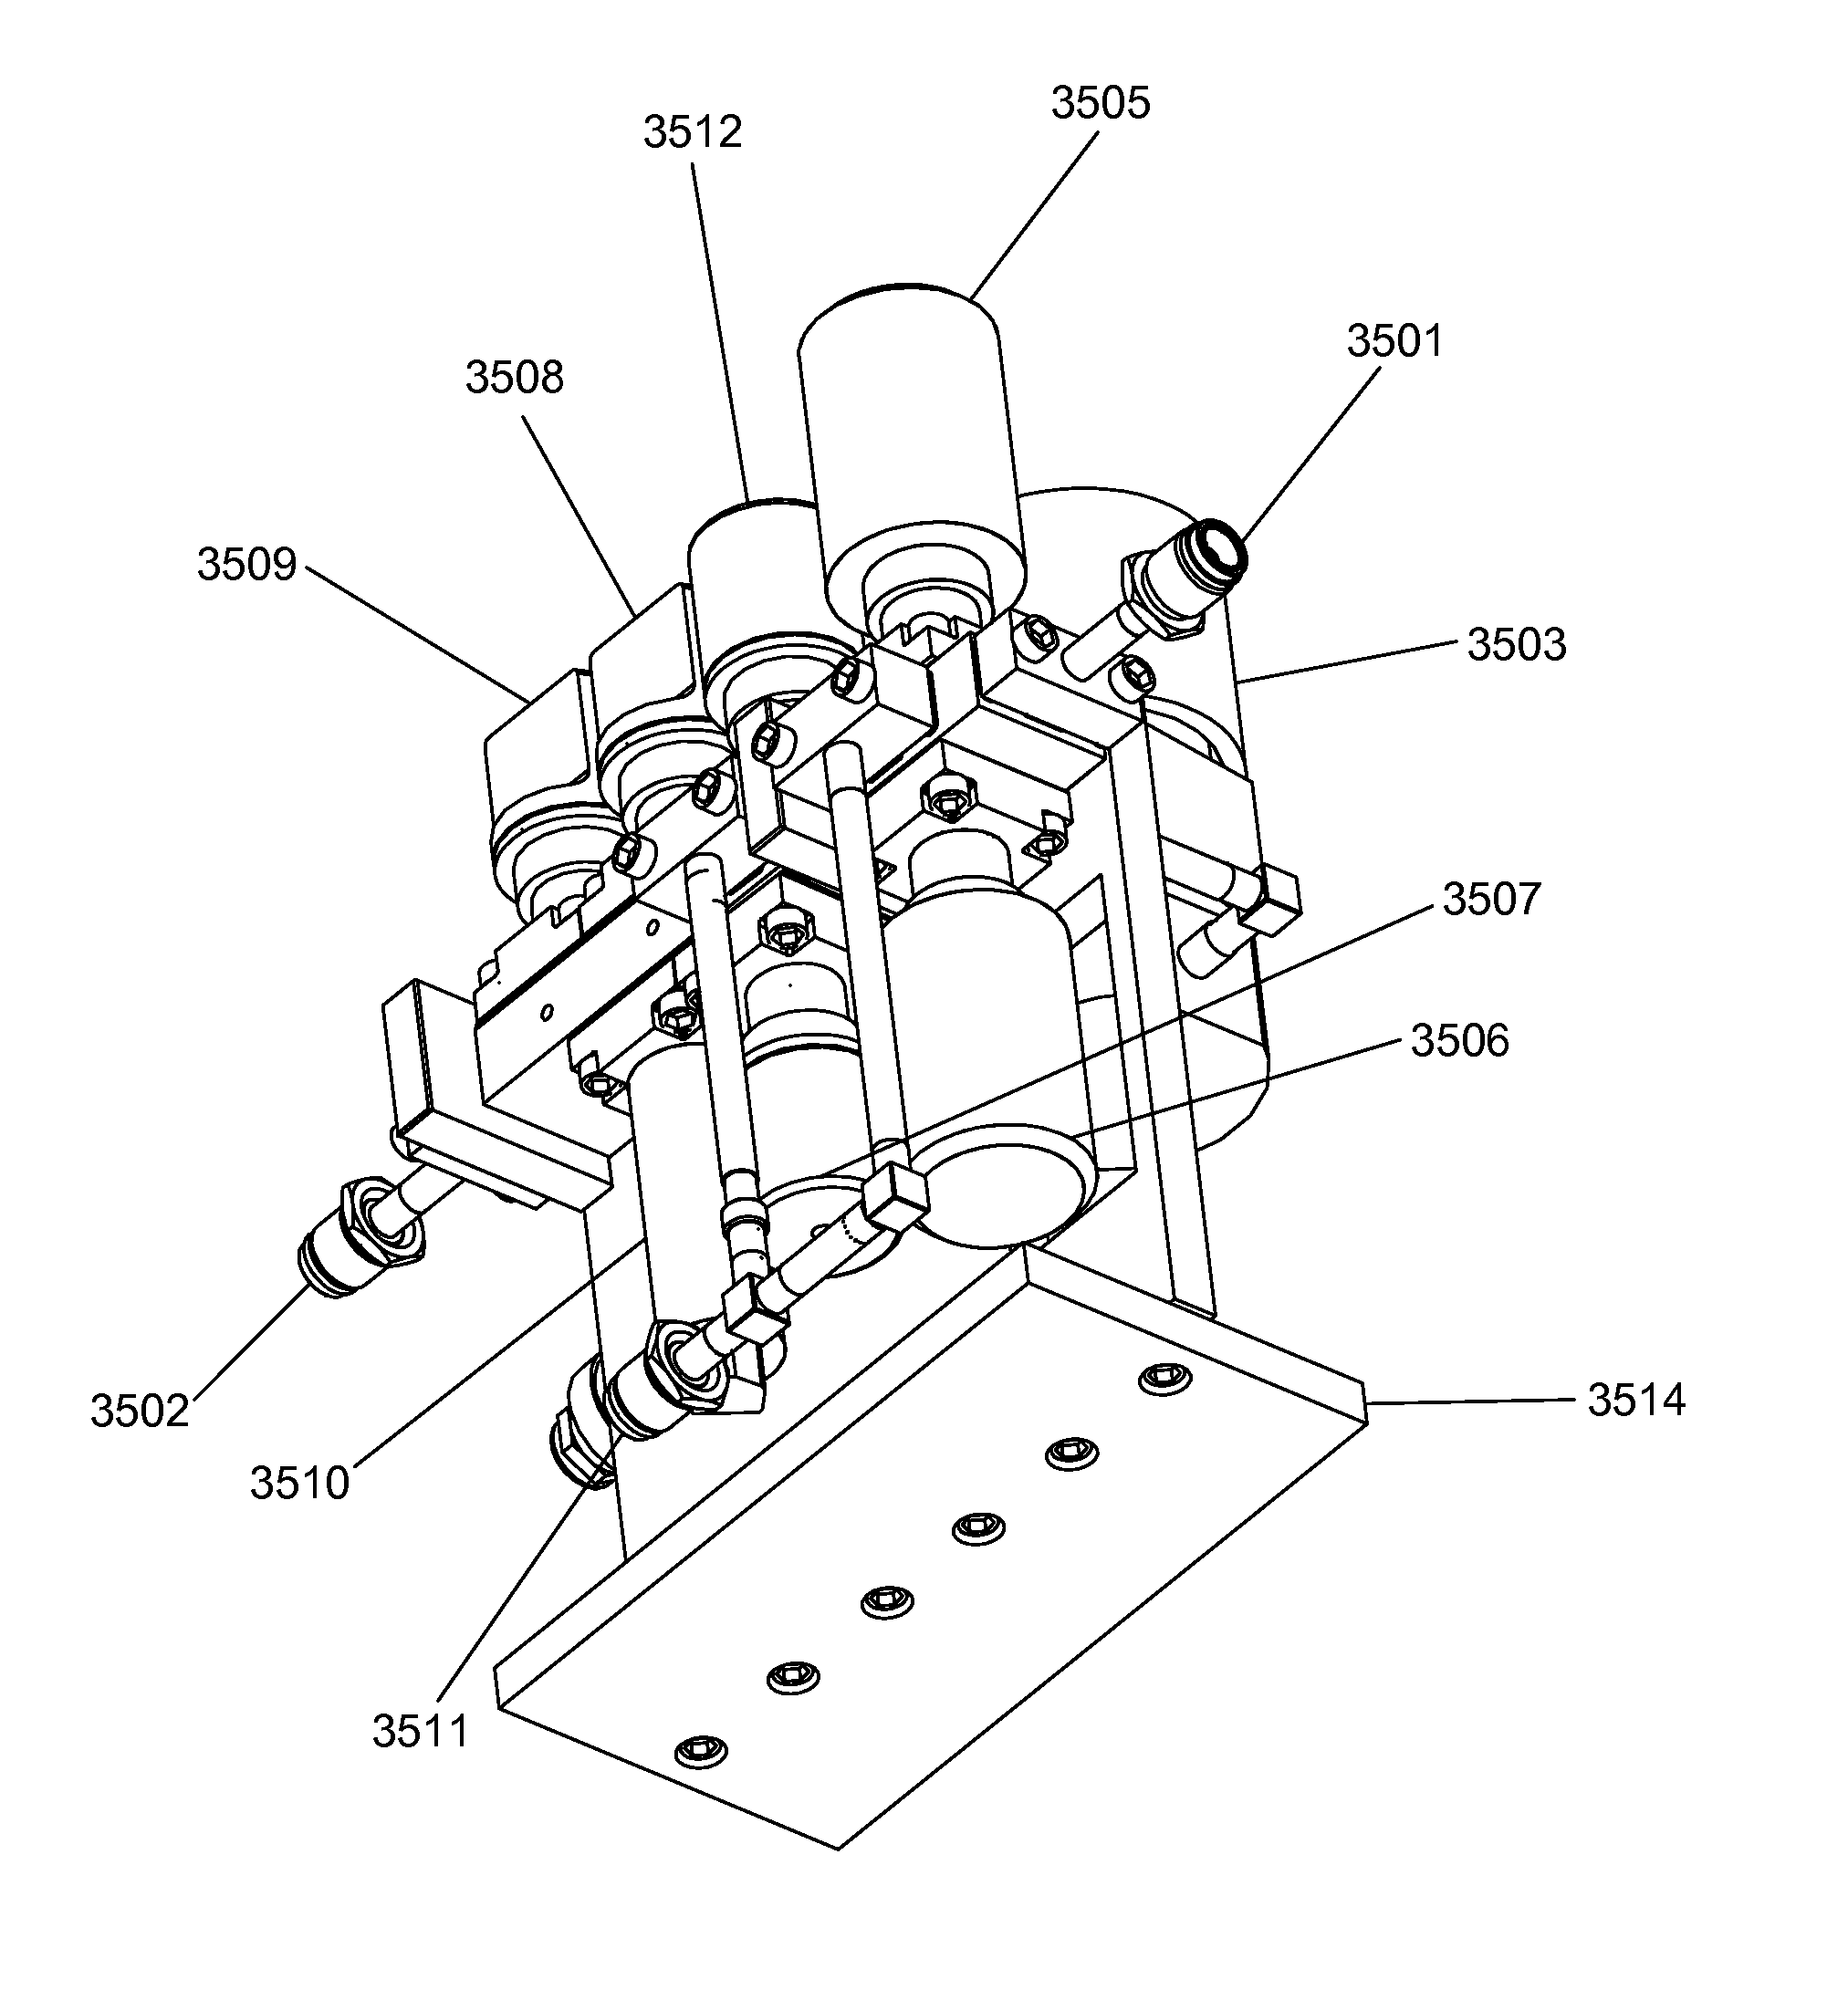 Manifold system for gas and fluid delivery